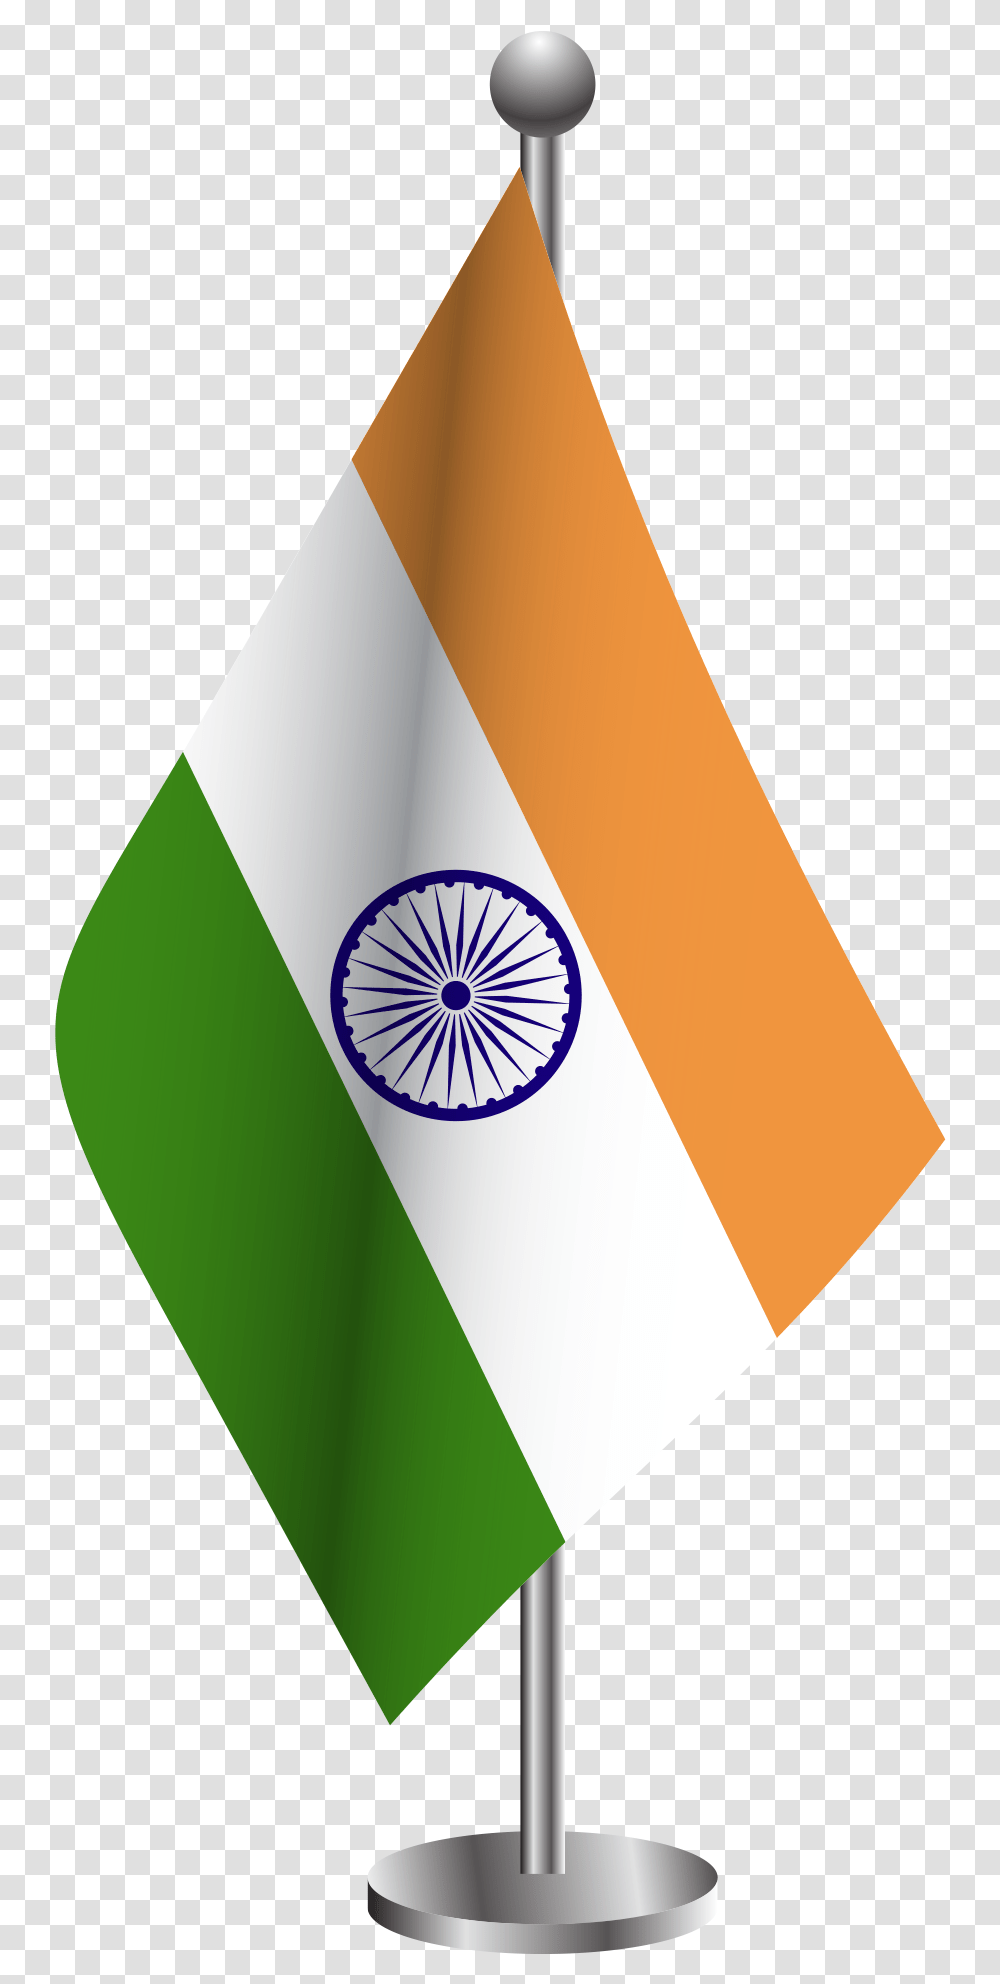 Indian Flag Clipart Image Free Download Searchpng Indian Flag Pmg, Lamp, Apparel Transparent Png